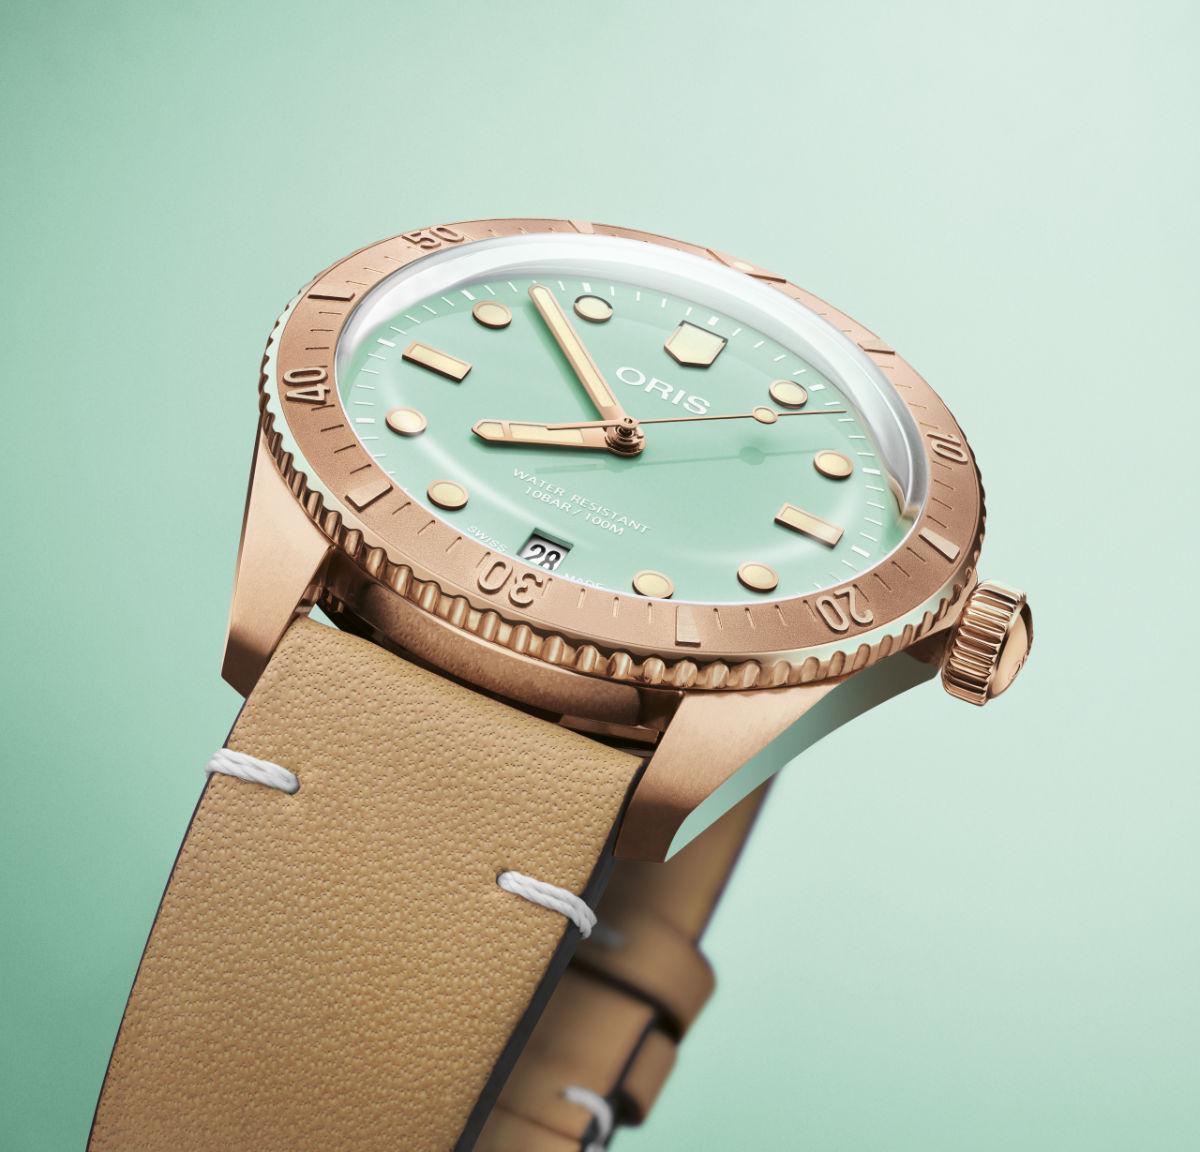 Oris Presents Its New Divers Sixty-Five Cotton Candy Watch